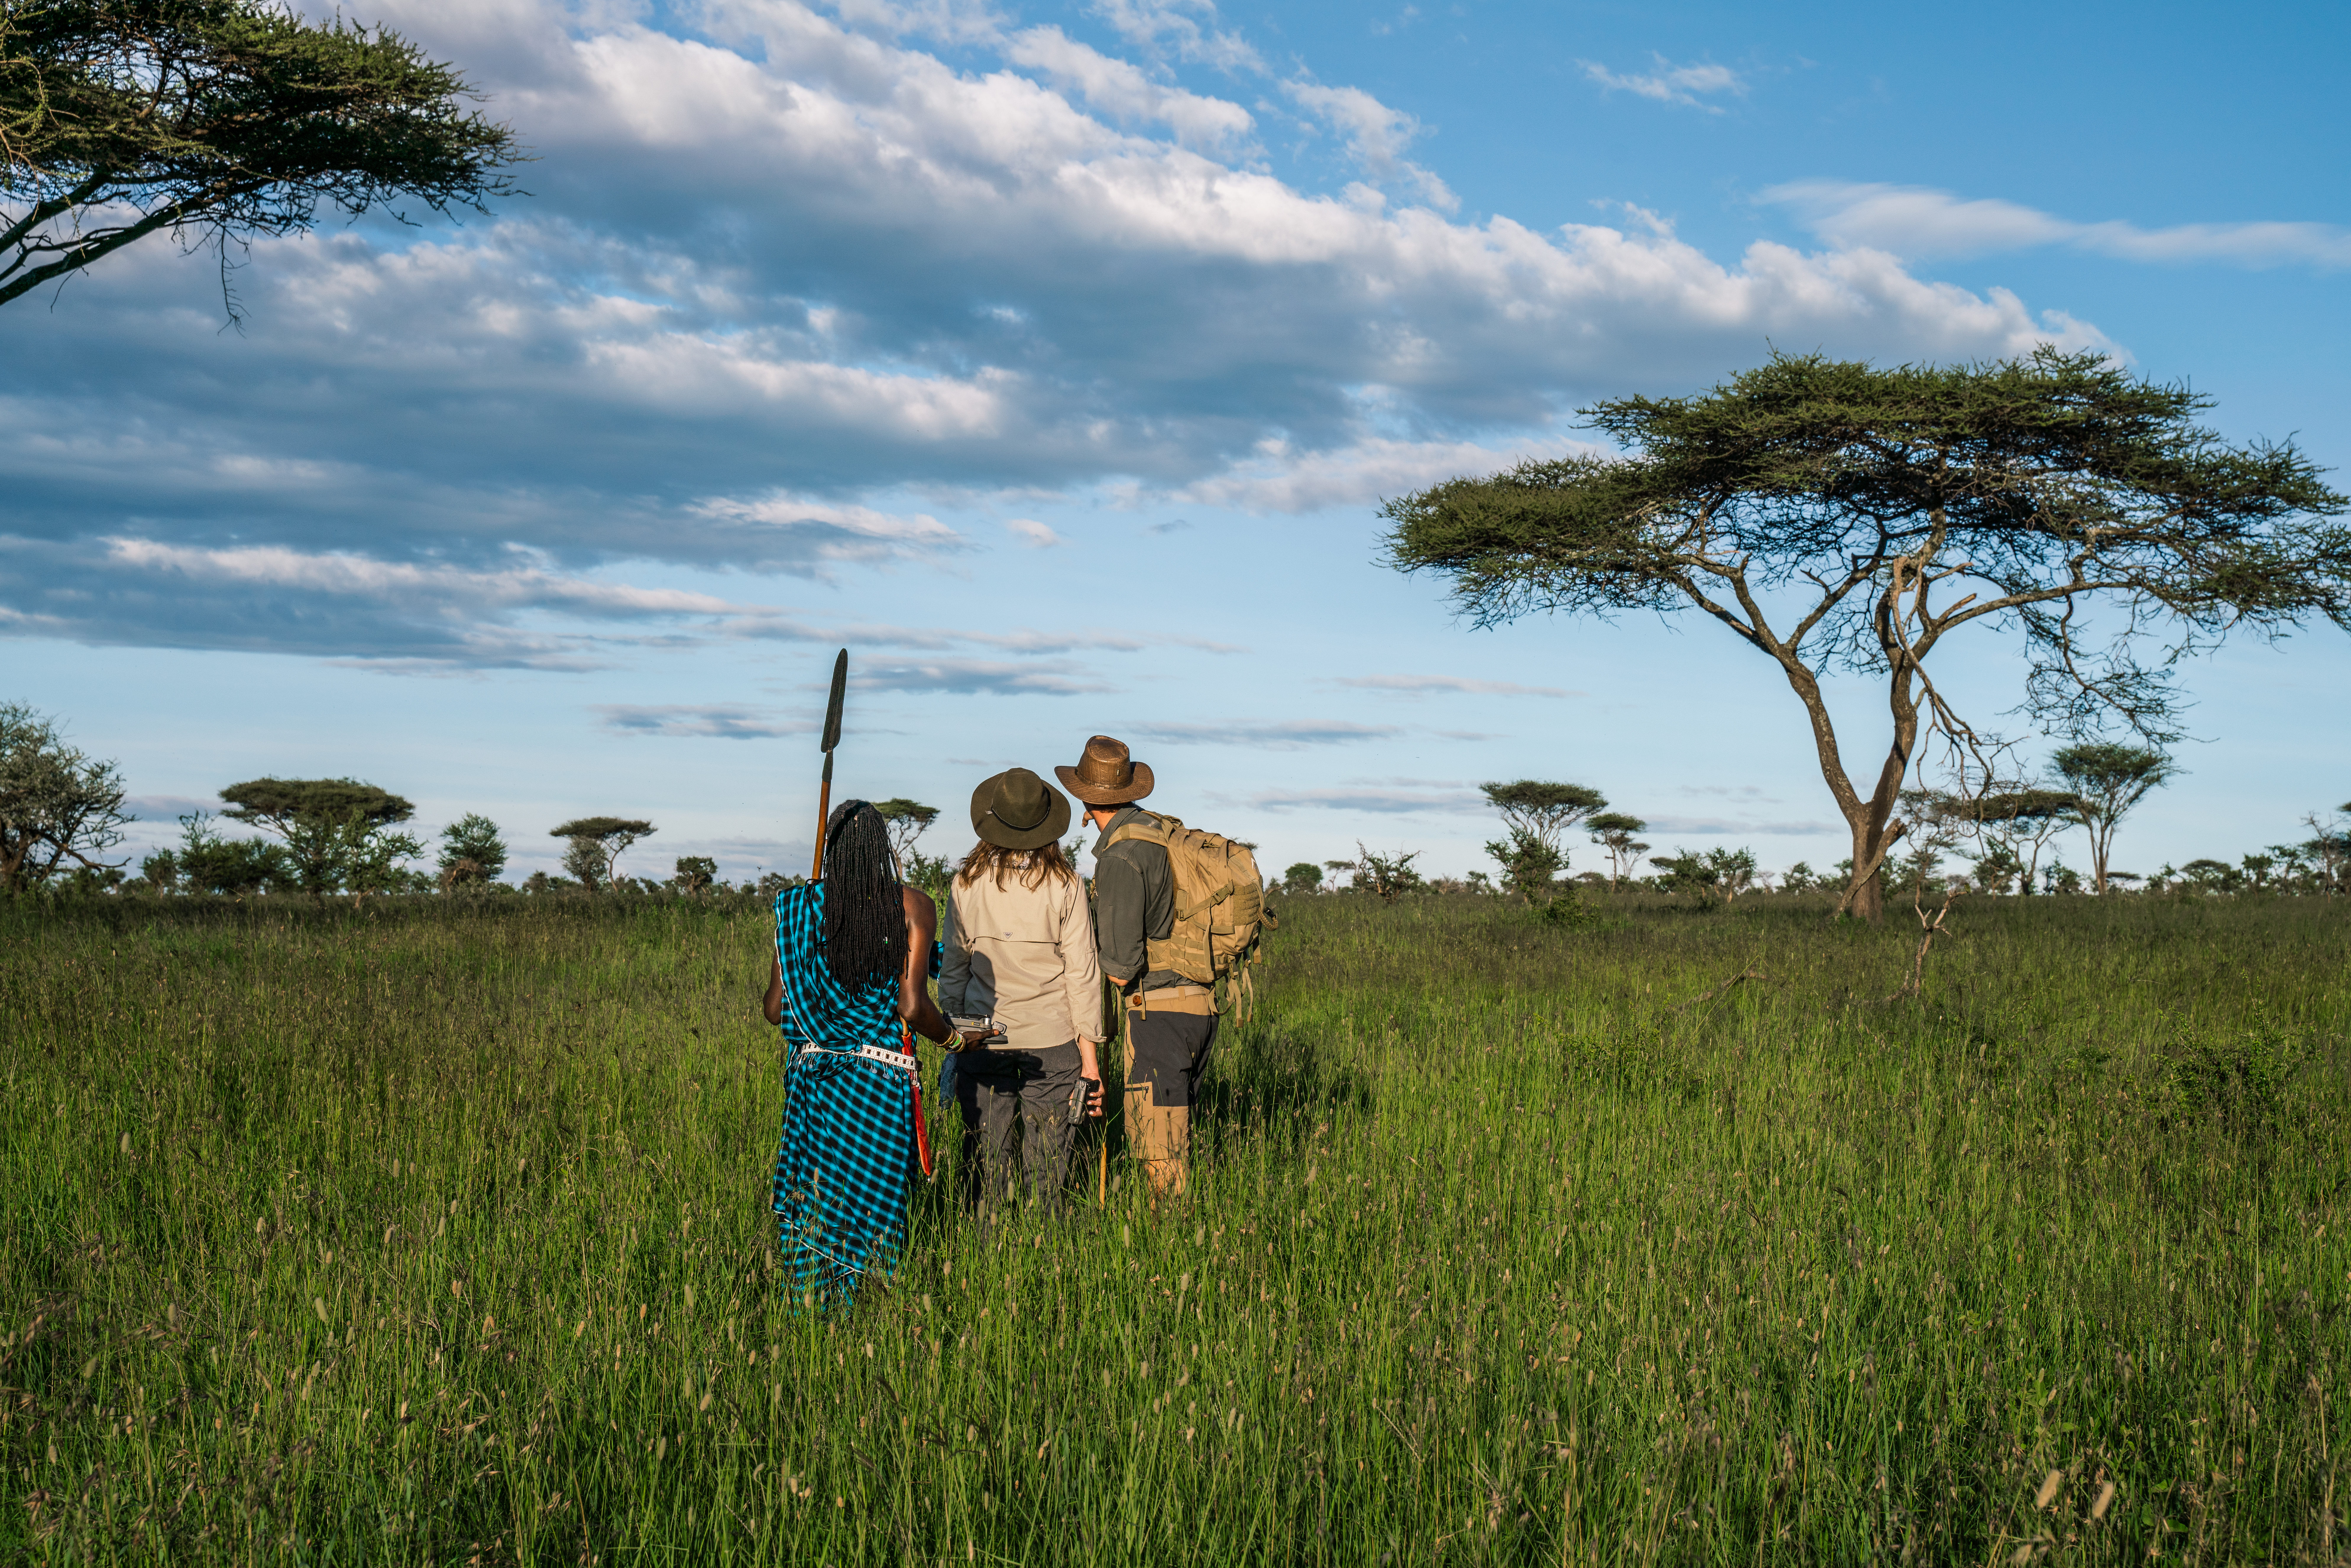 Wilderness opens camp in the Serengeti